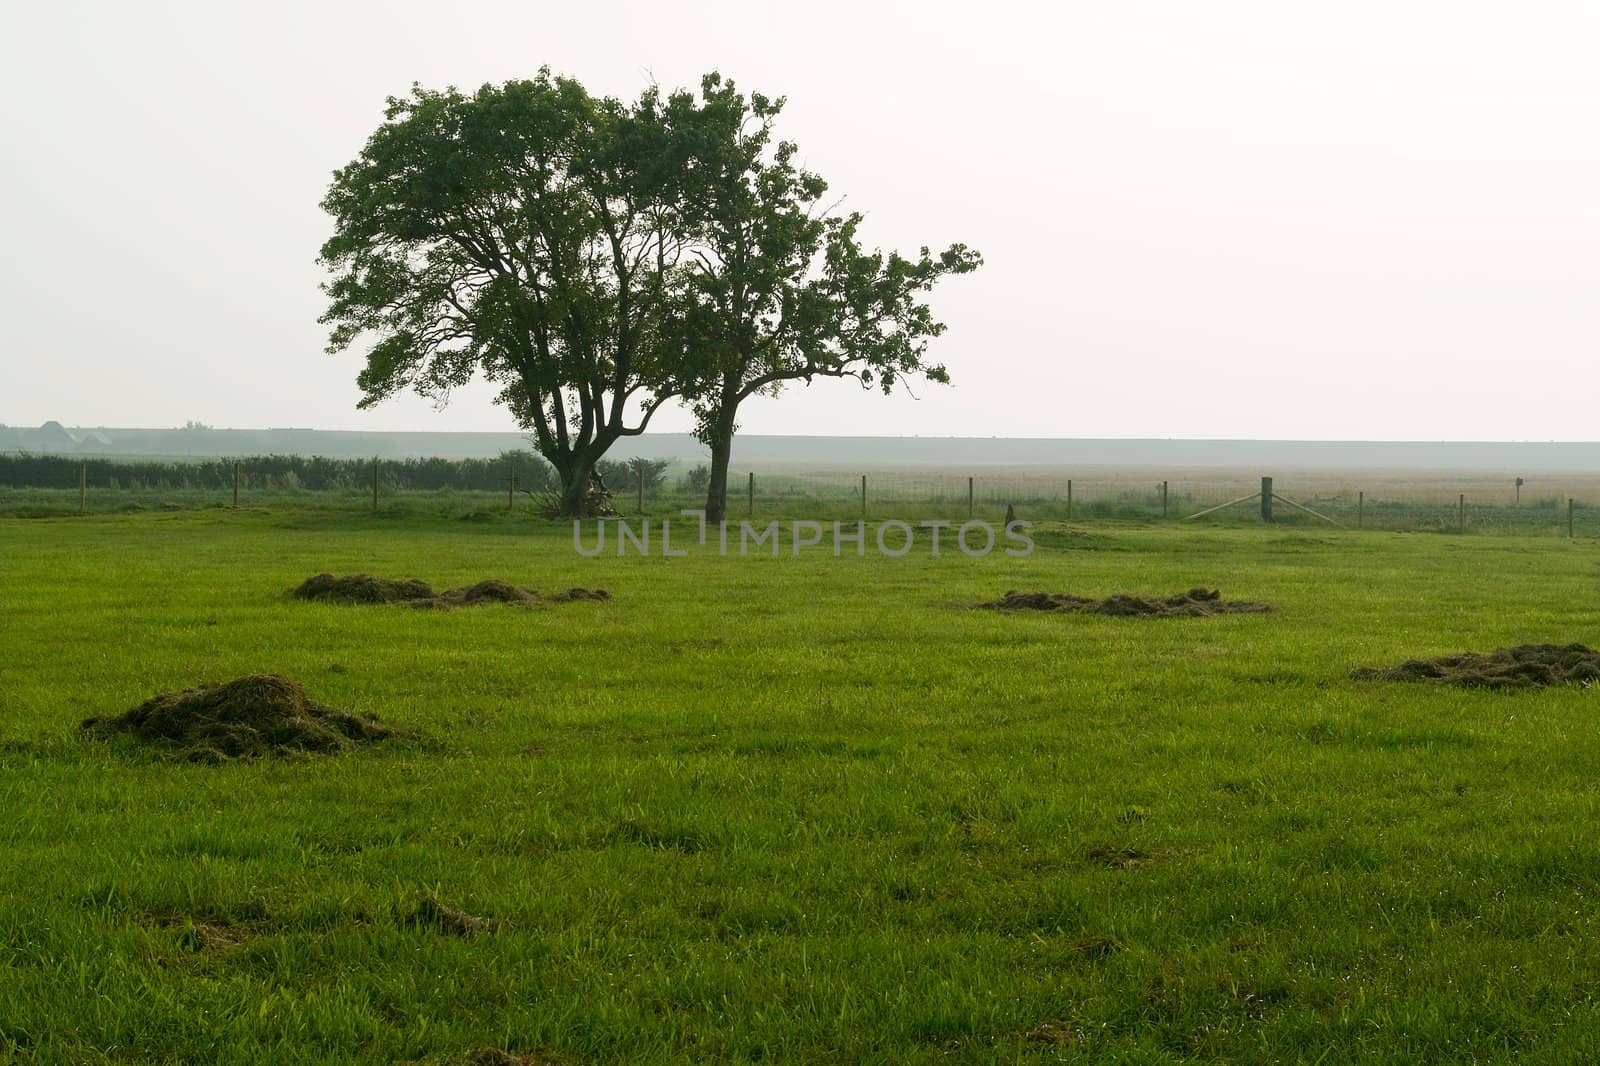 Two lonely trees standing peacefully in the evening light on Wieringen, the Netherlands.